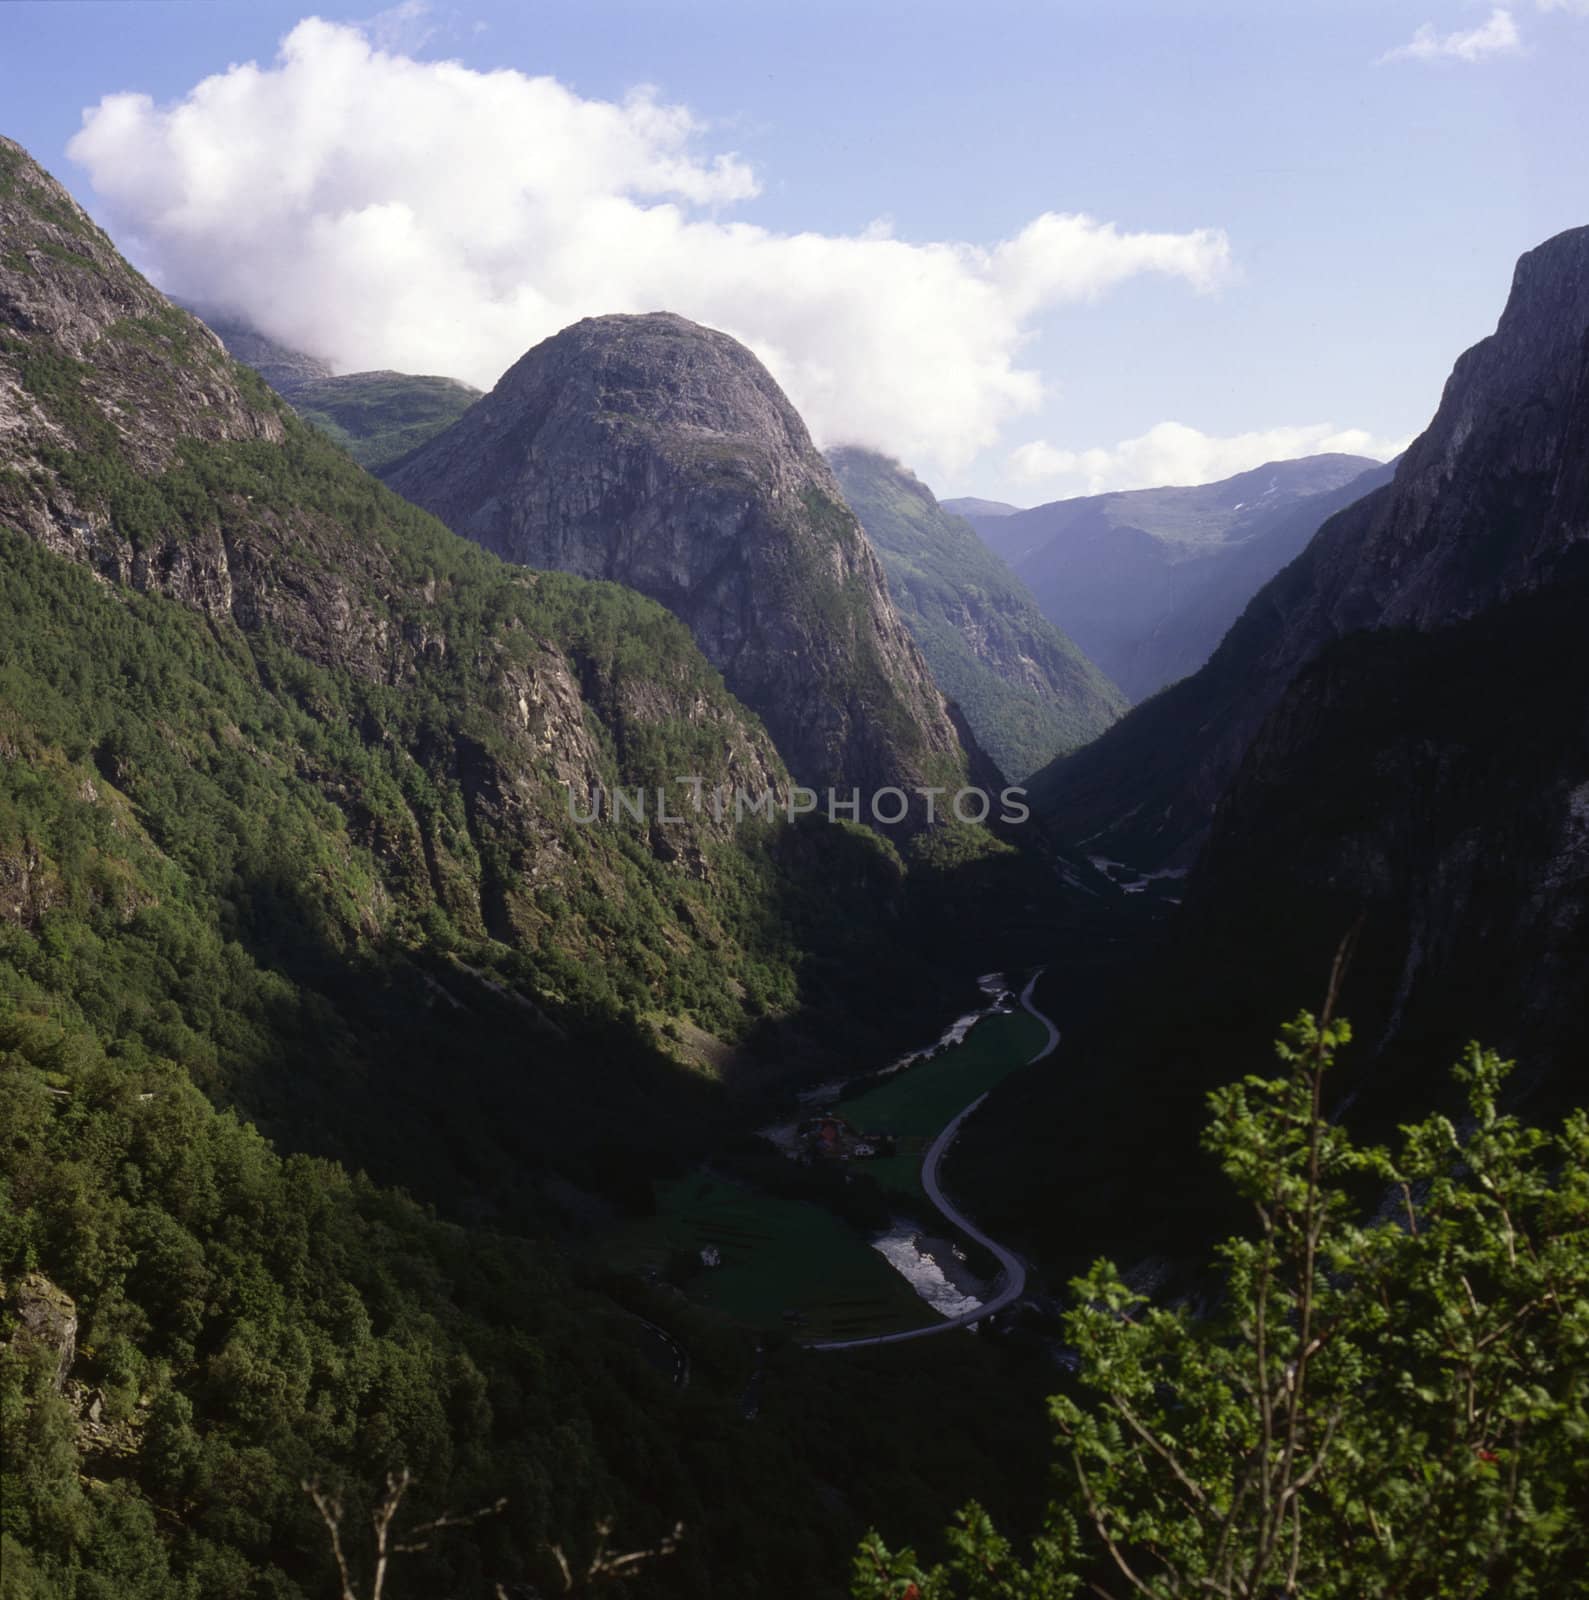 Naeroydal Valley in Norway with mountains and village in valley